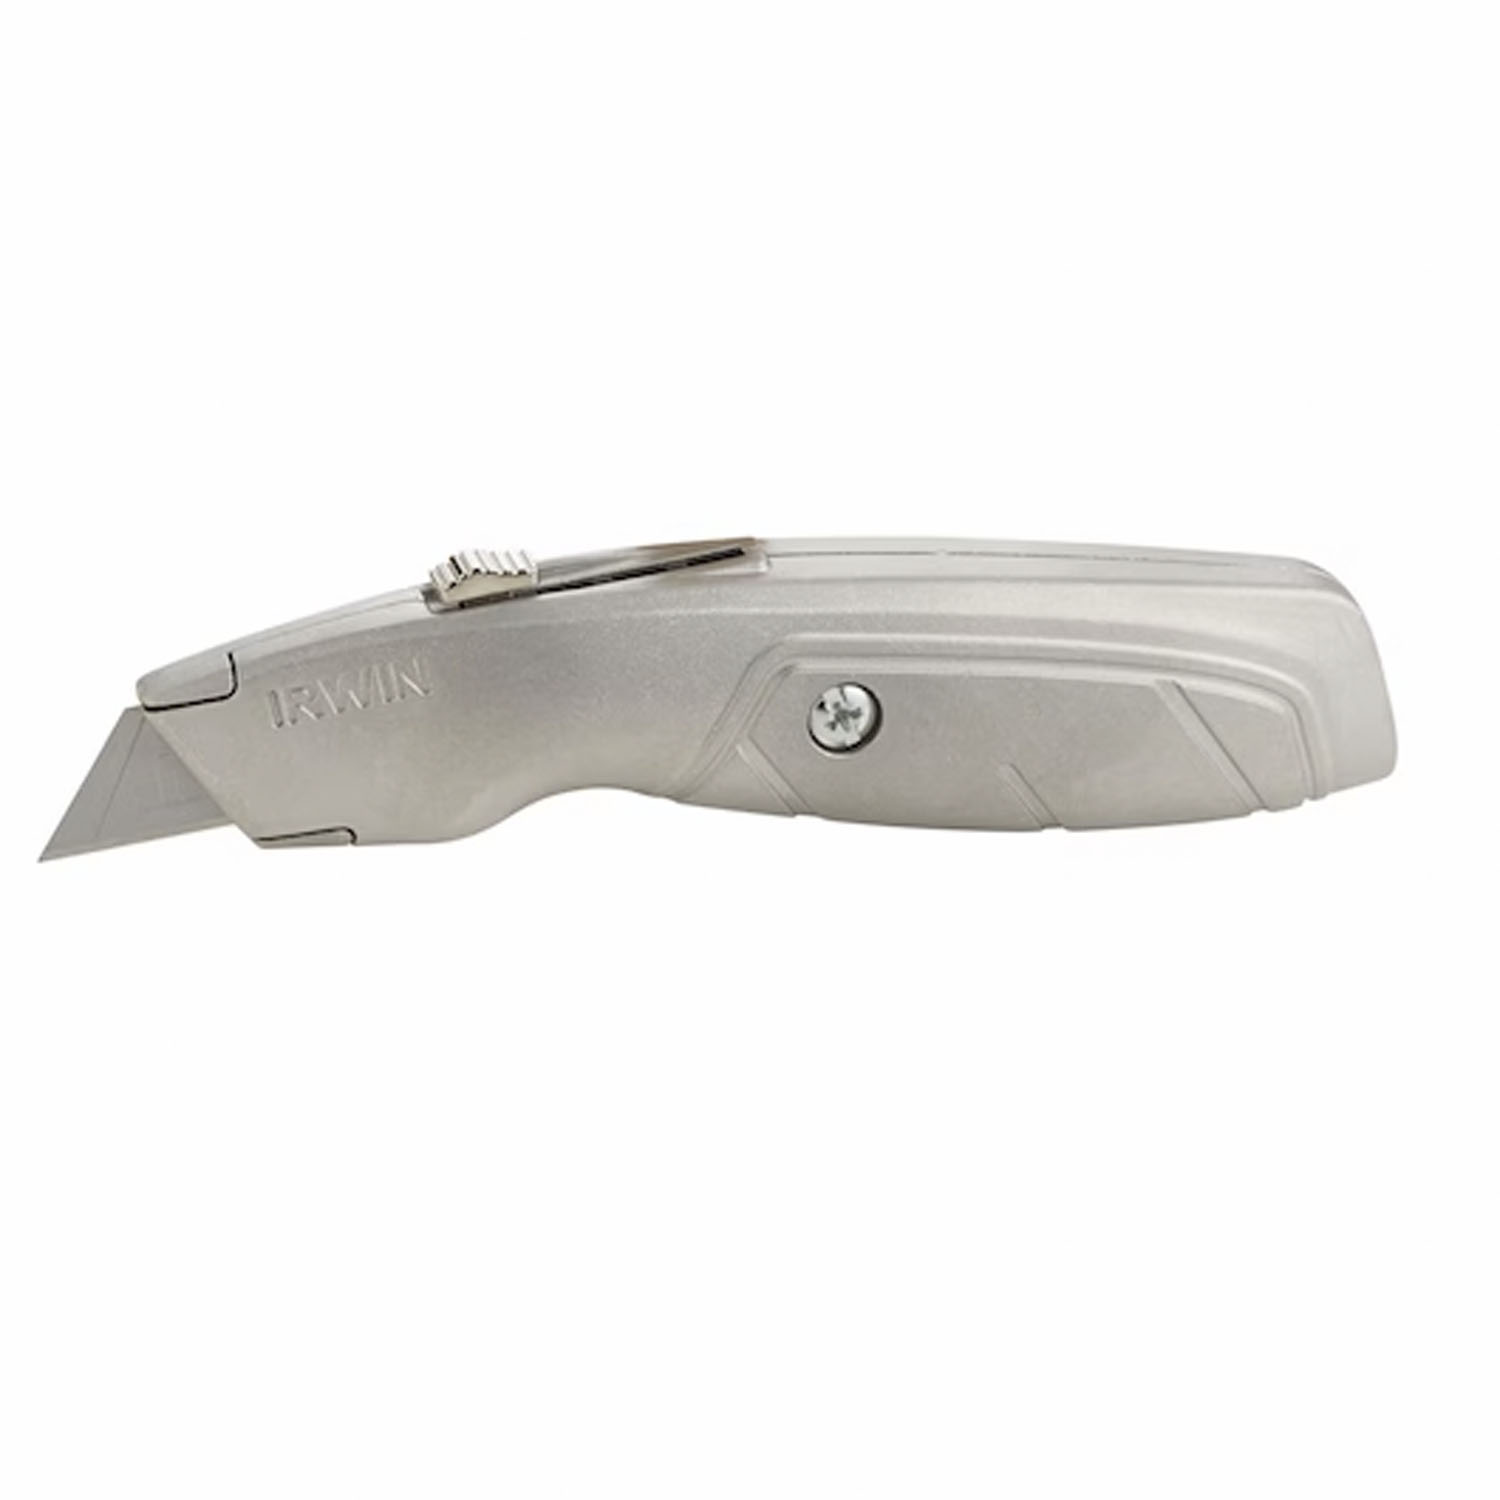 RETRACTABLE UTILITY KNIFE WITH FIVE BLADES